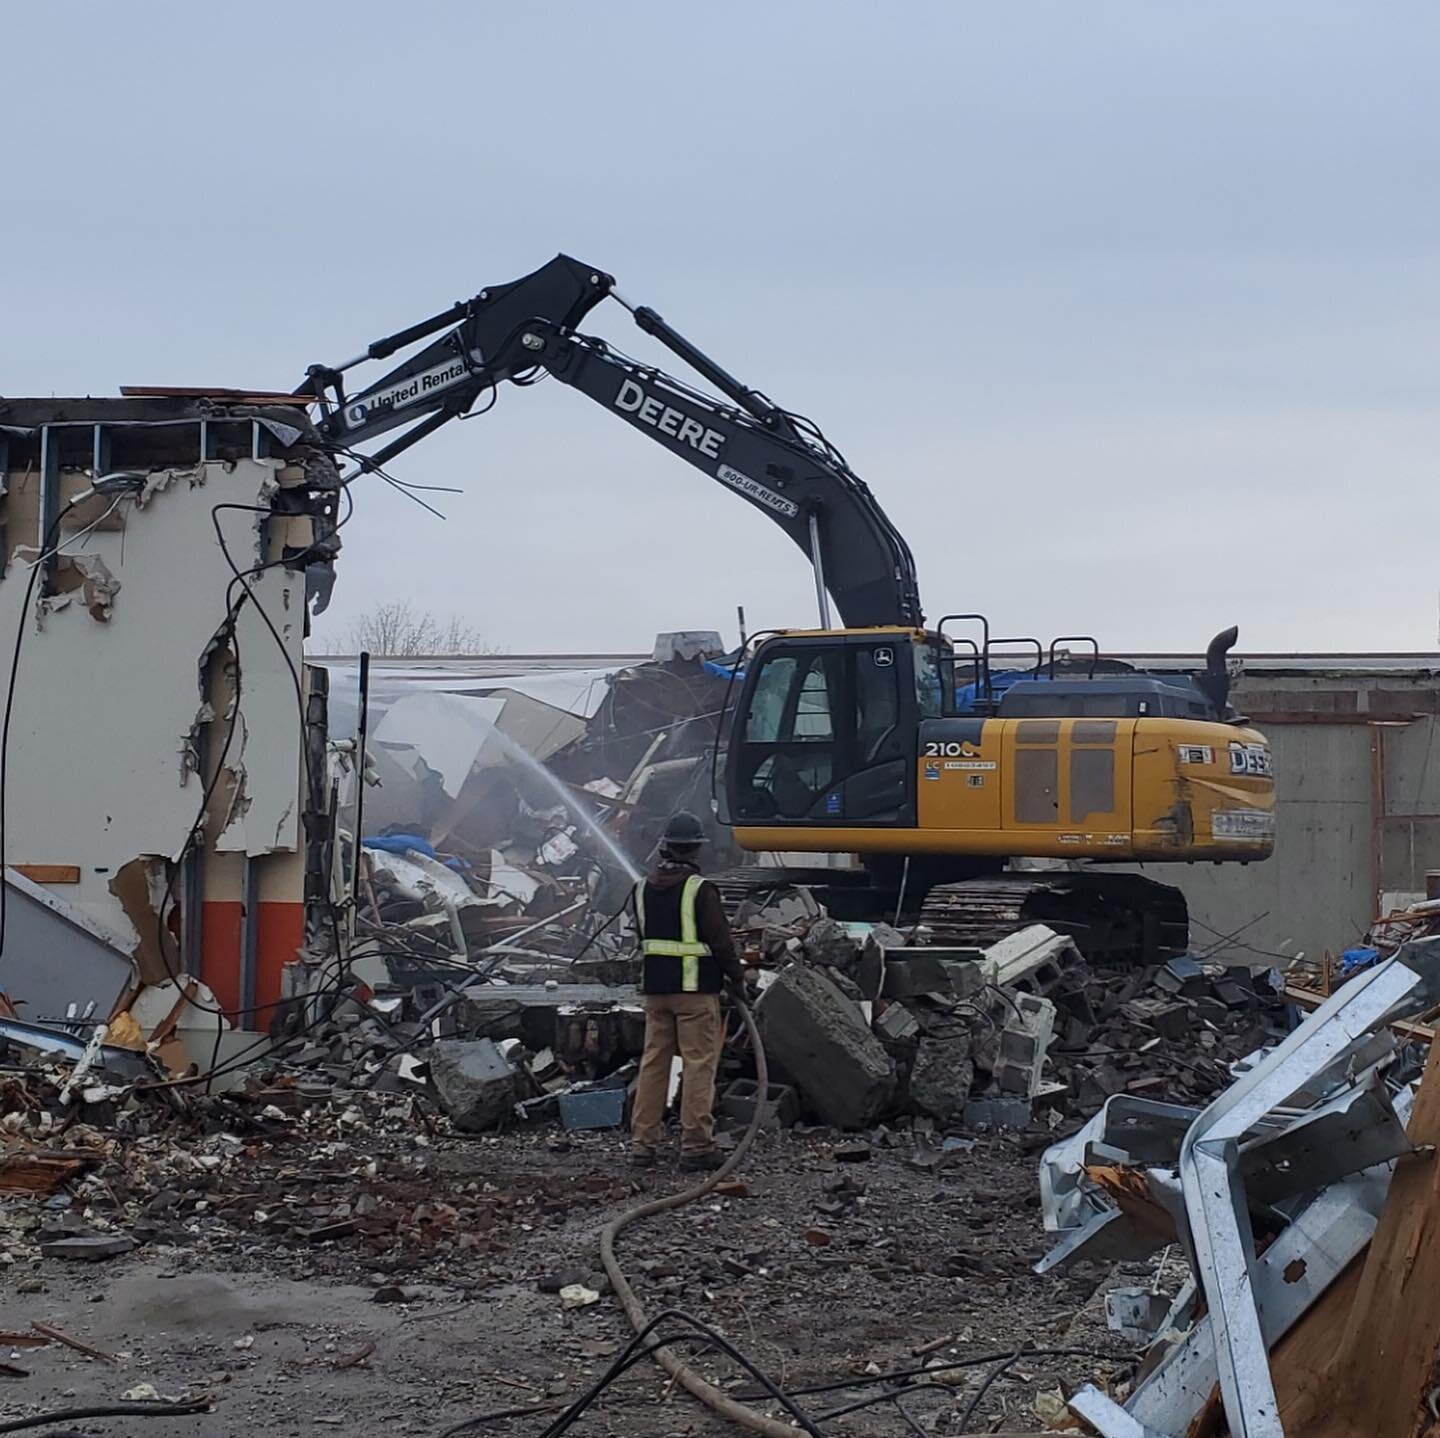 Kalama school district saying goodbye to the existing Elementary school, demolishing a portion and keeping 3200 square feet, SW portion to be repurposed from a media center into an athletic center. Thank you for the pictures Ted. #Emerick #emerickcon